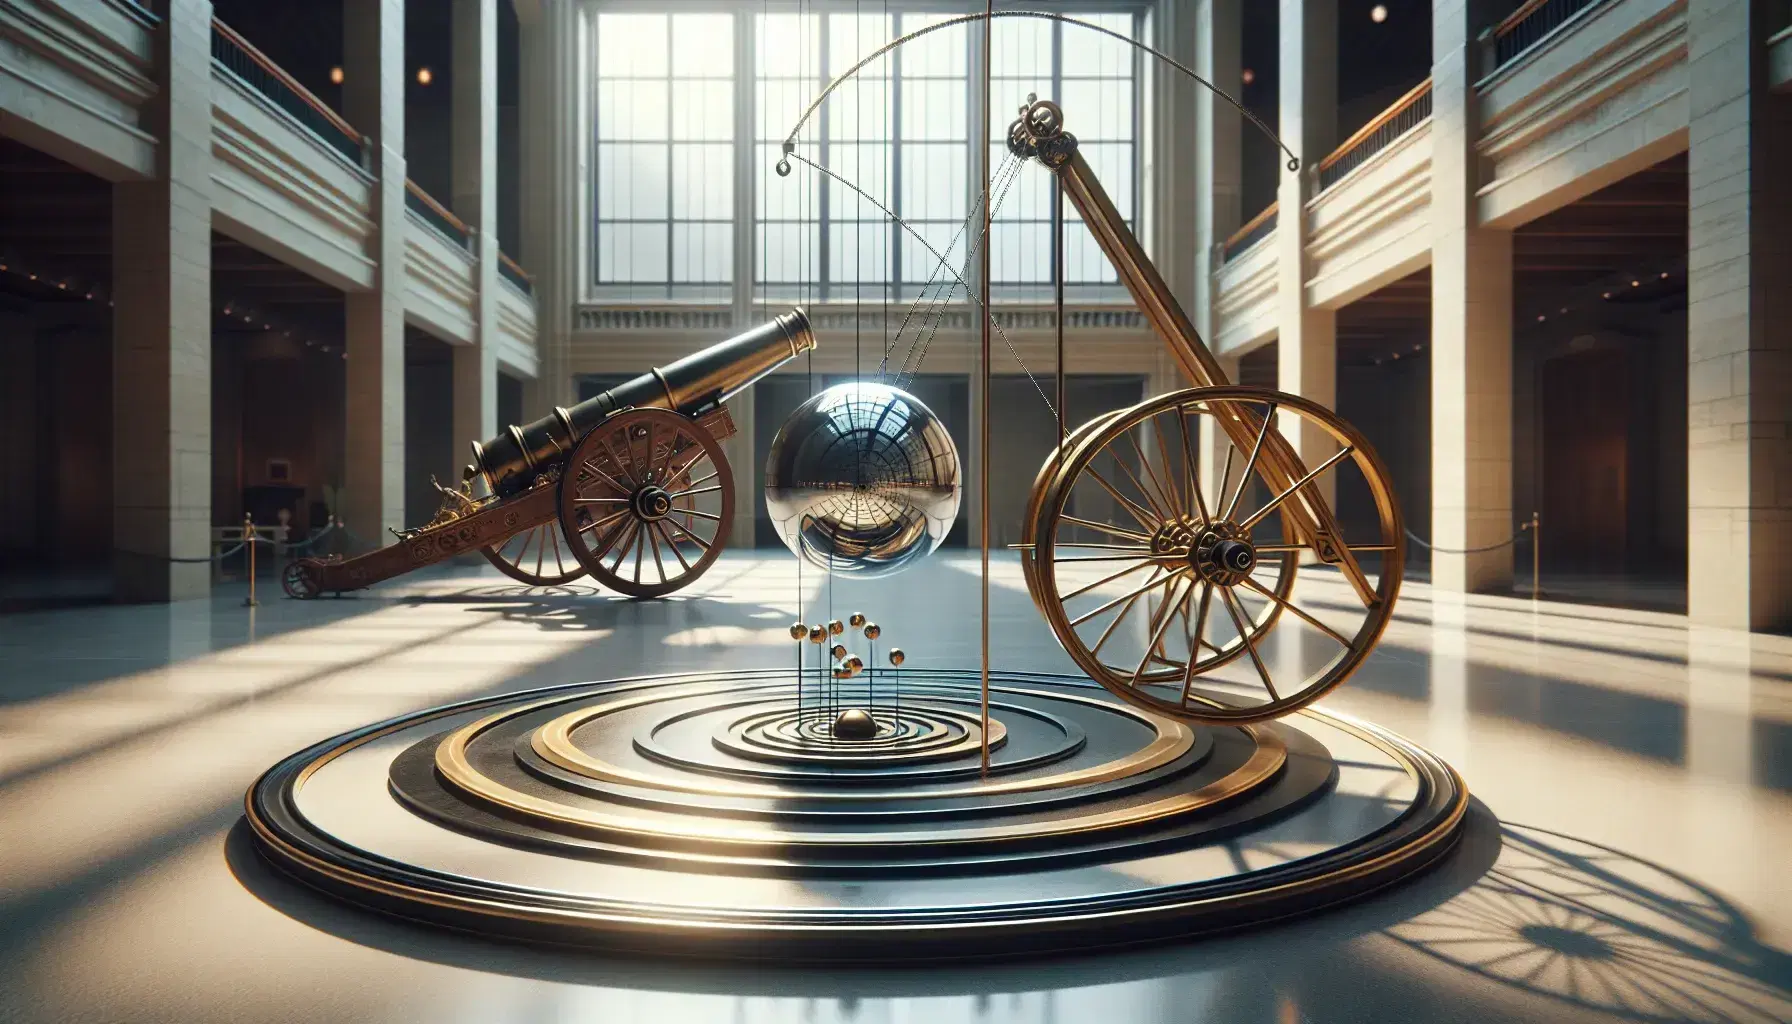 Foucault pendulum in motion in a sunny atrium, metal sphere above concentric circles, vintage cannon and disk with colored spheres.